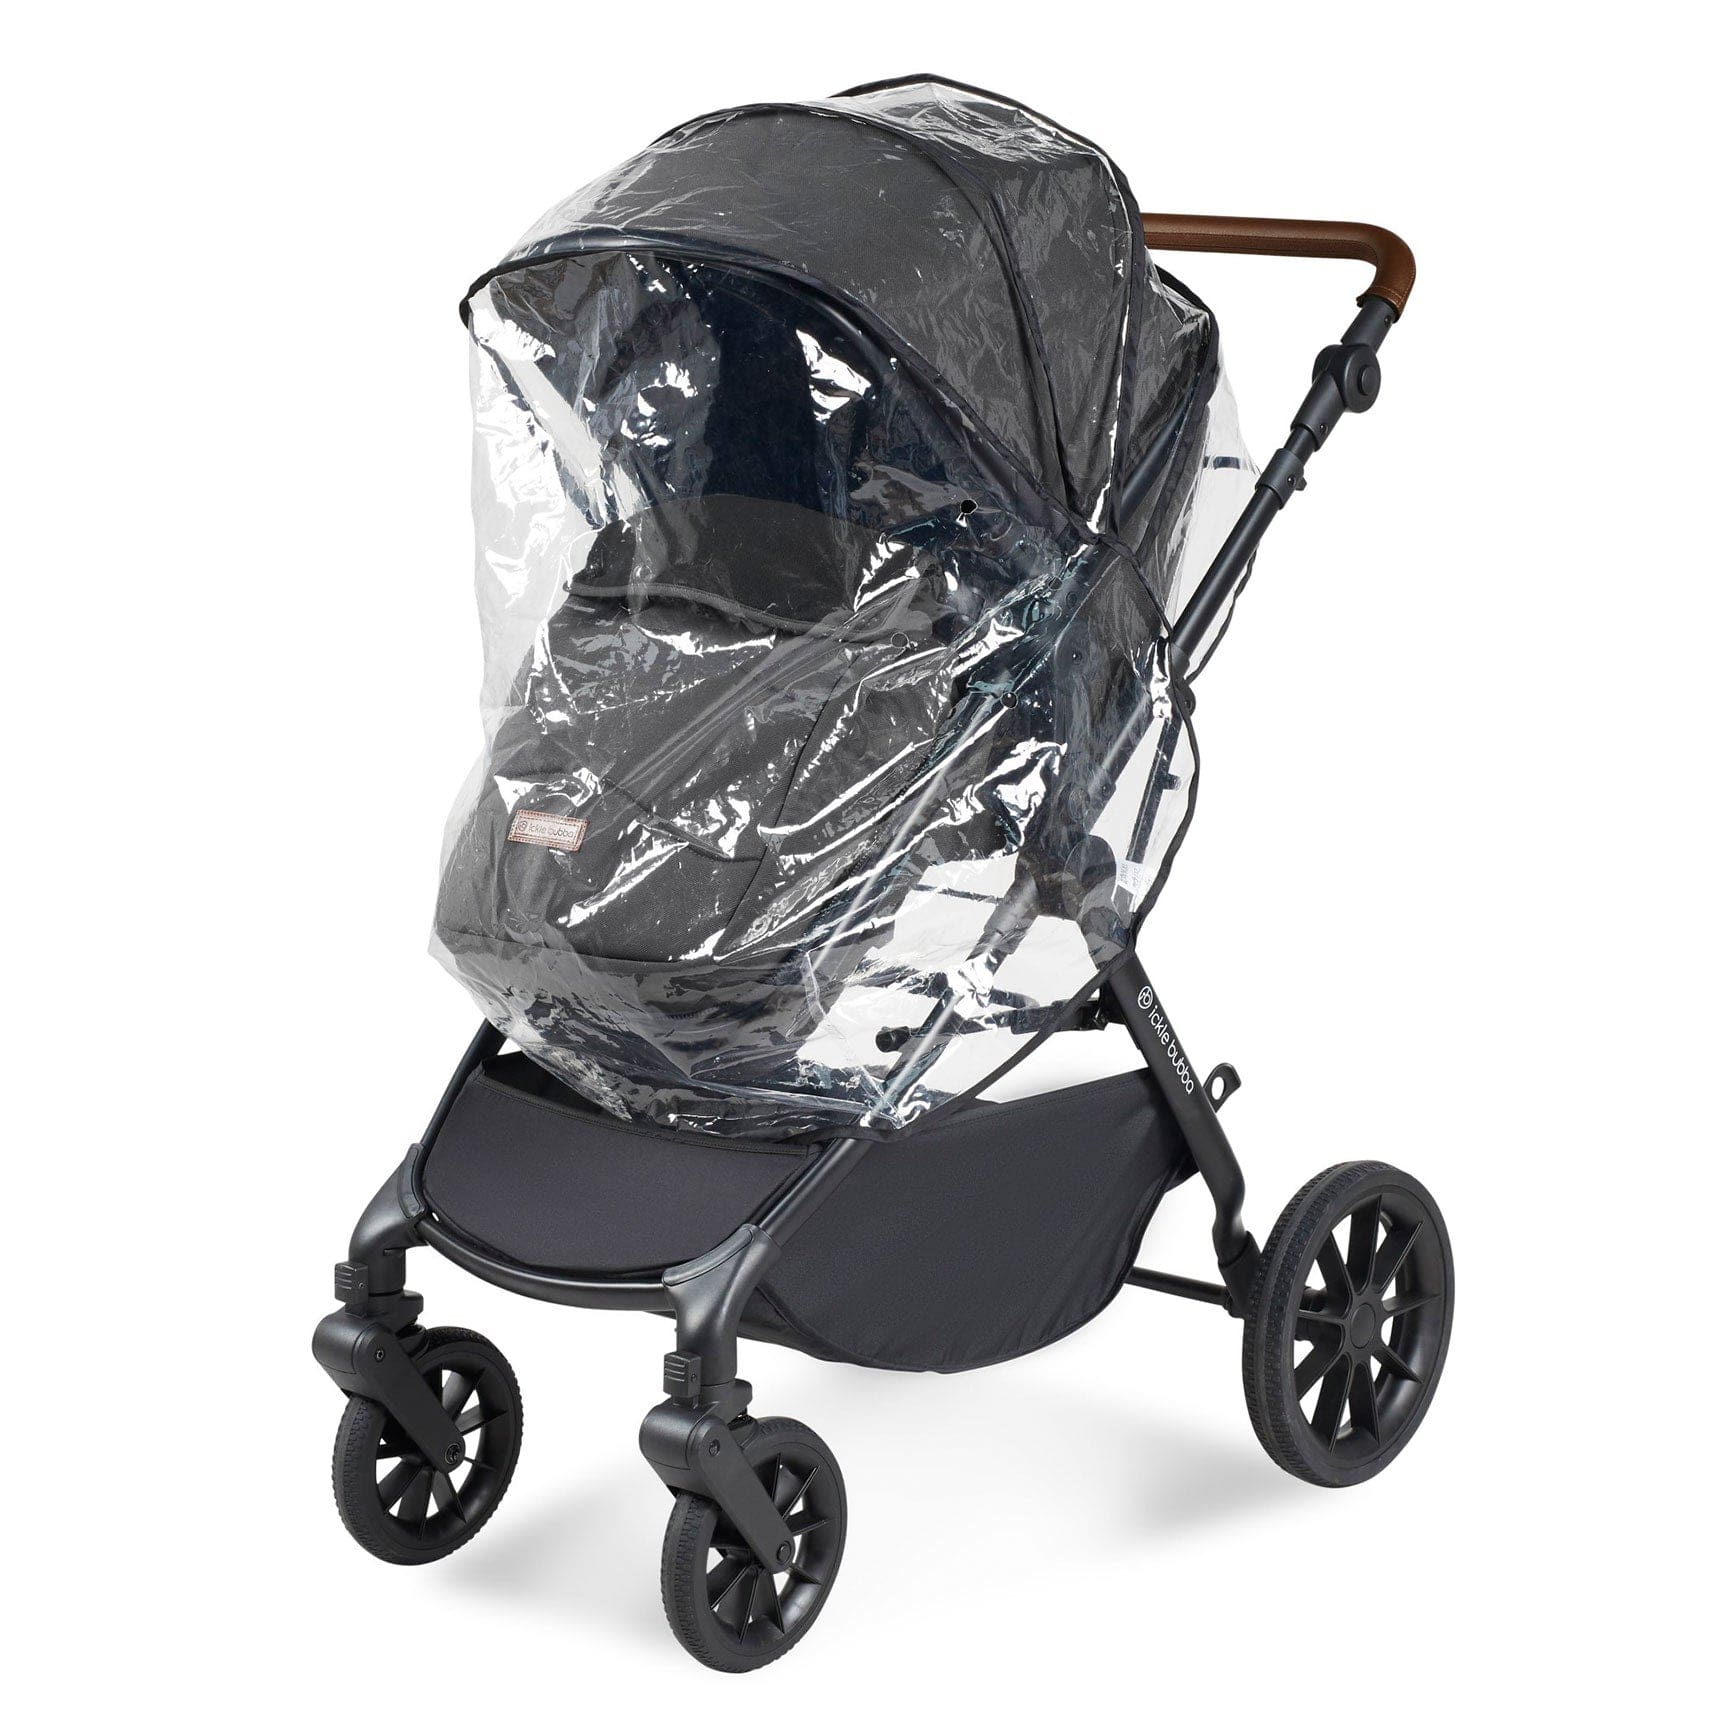 Ickle Bubba Ickle Bubba Cosmo All-in-One I-Size Travel System with Isofix Base - Black/Graphite Grey 10-007-300-007